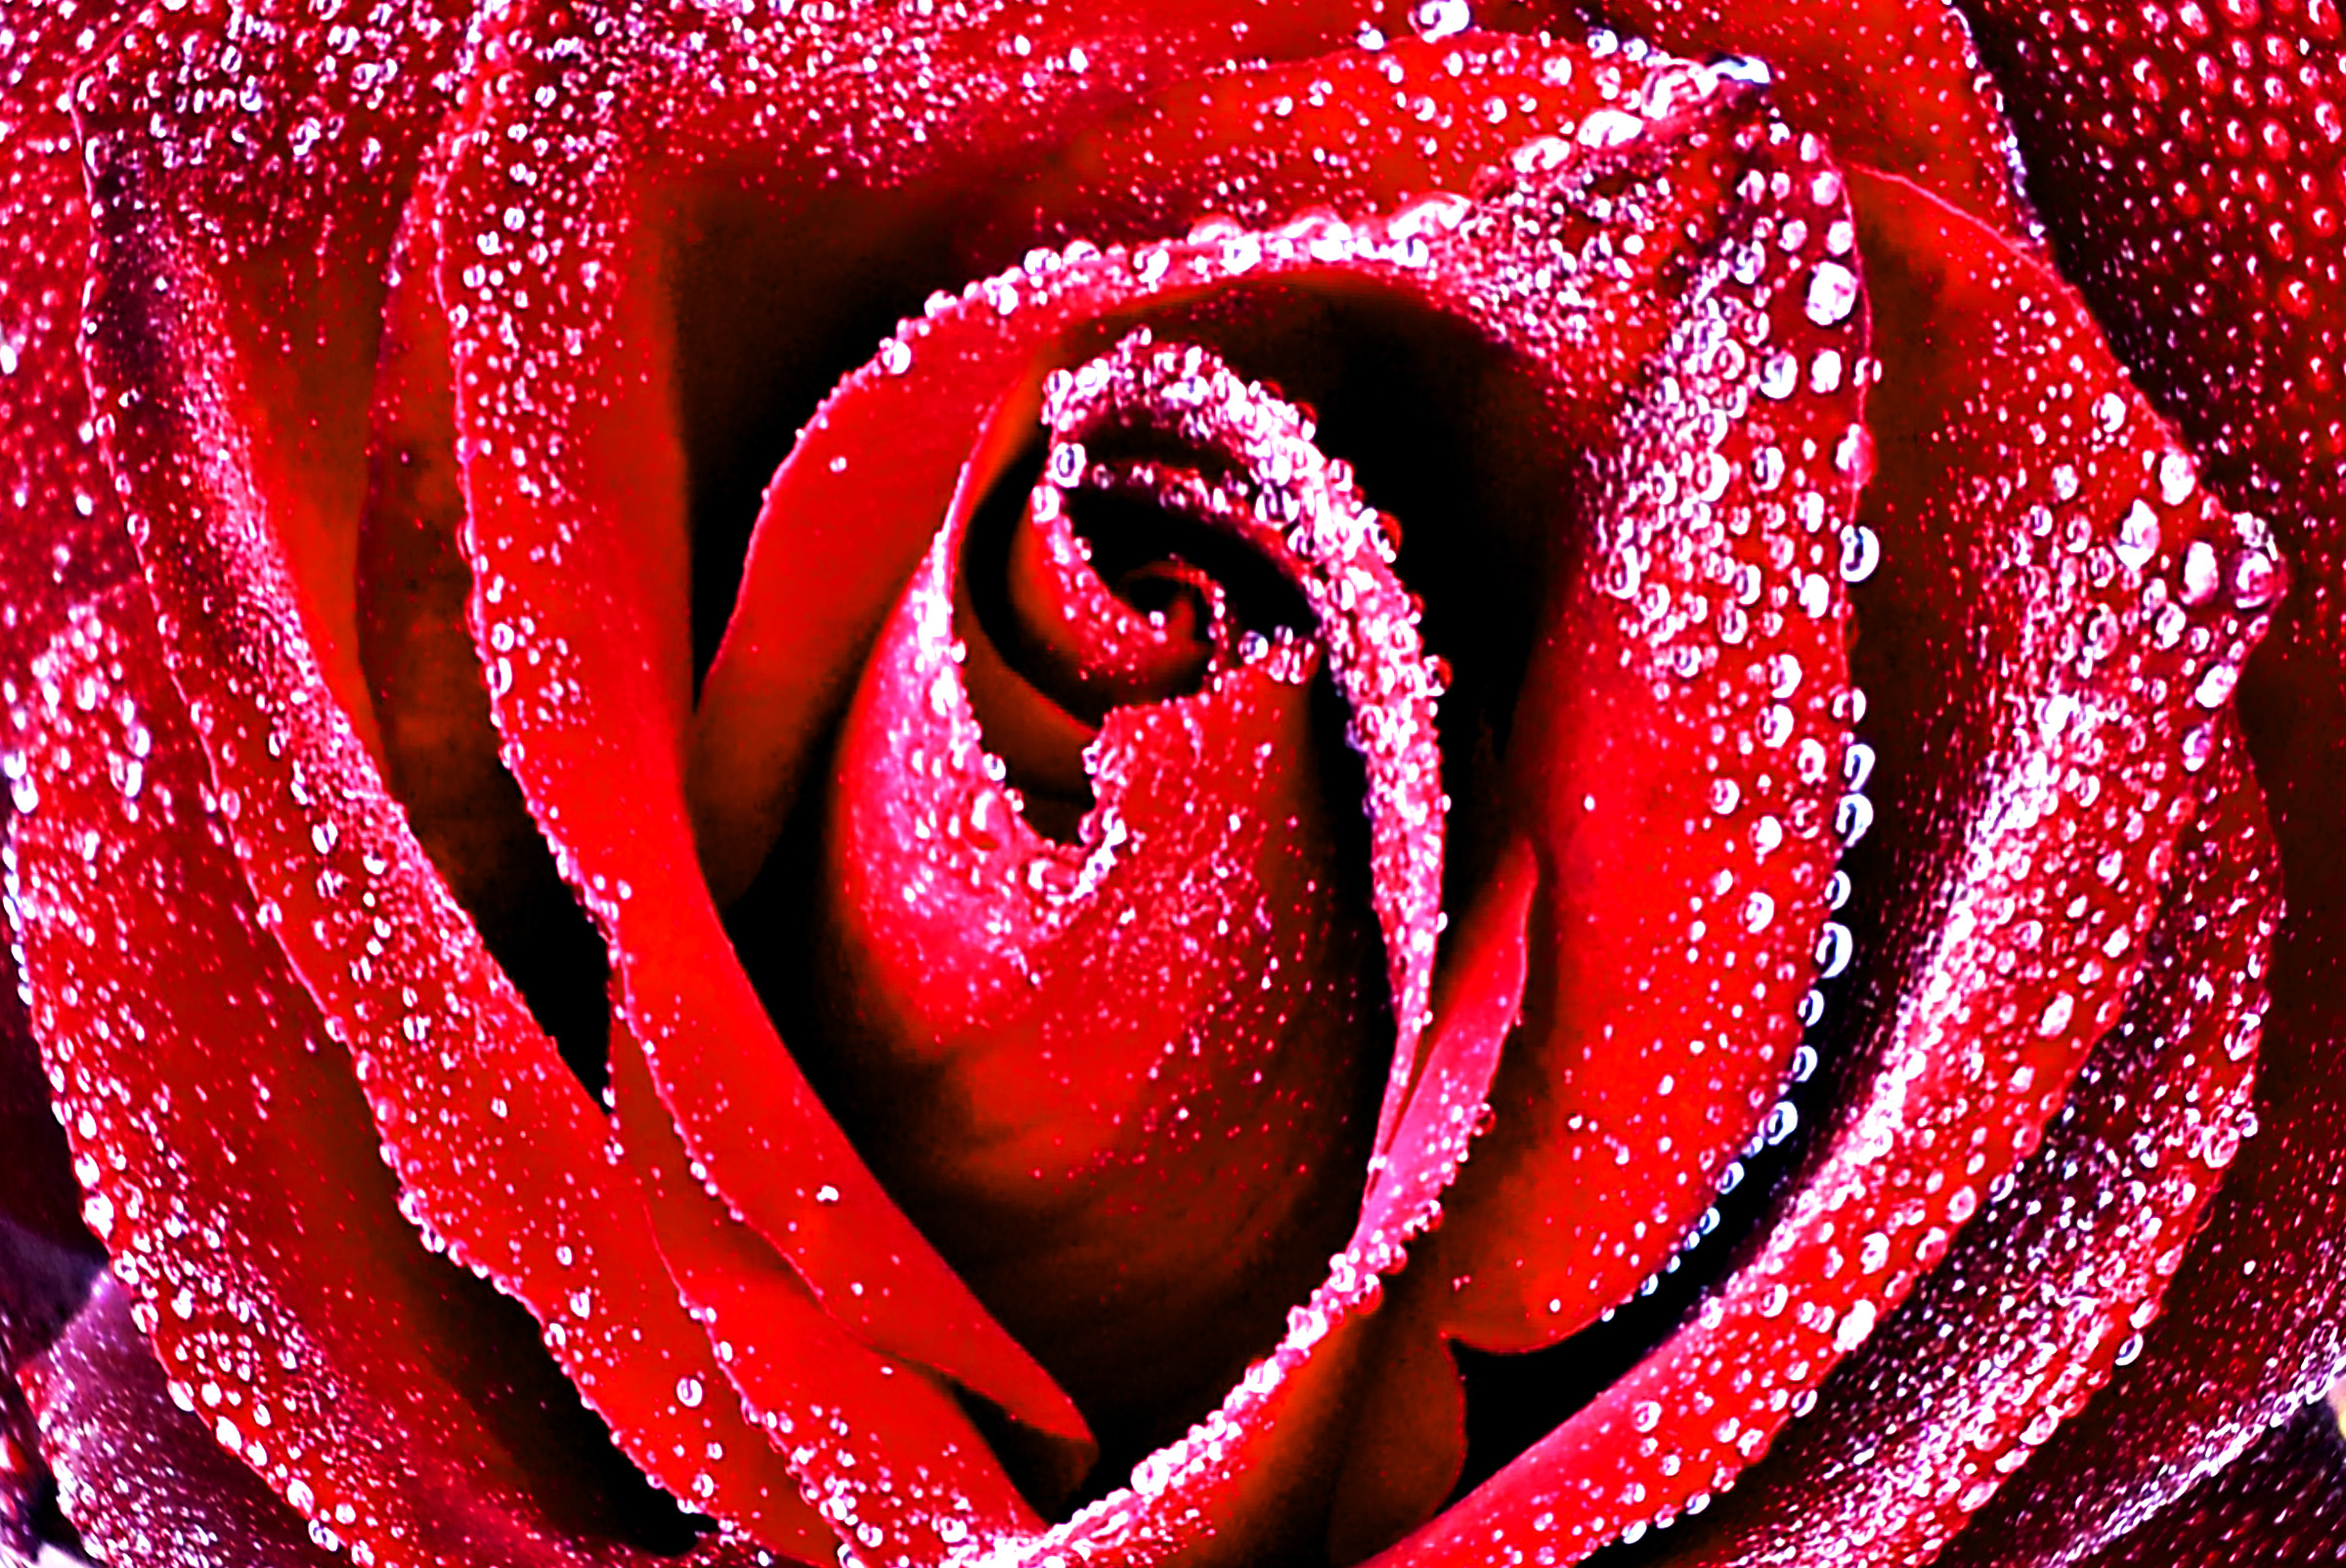 Red rose with dew drops closeup photo